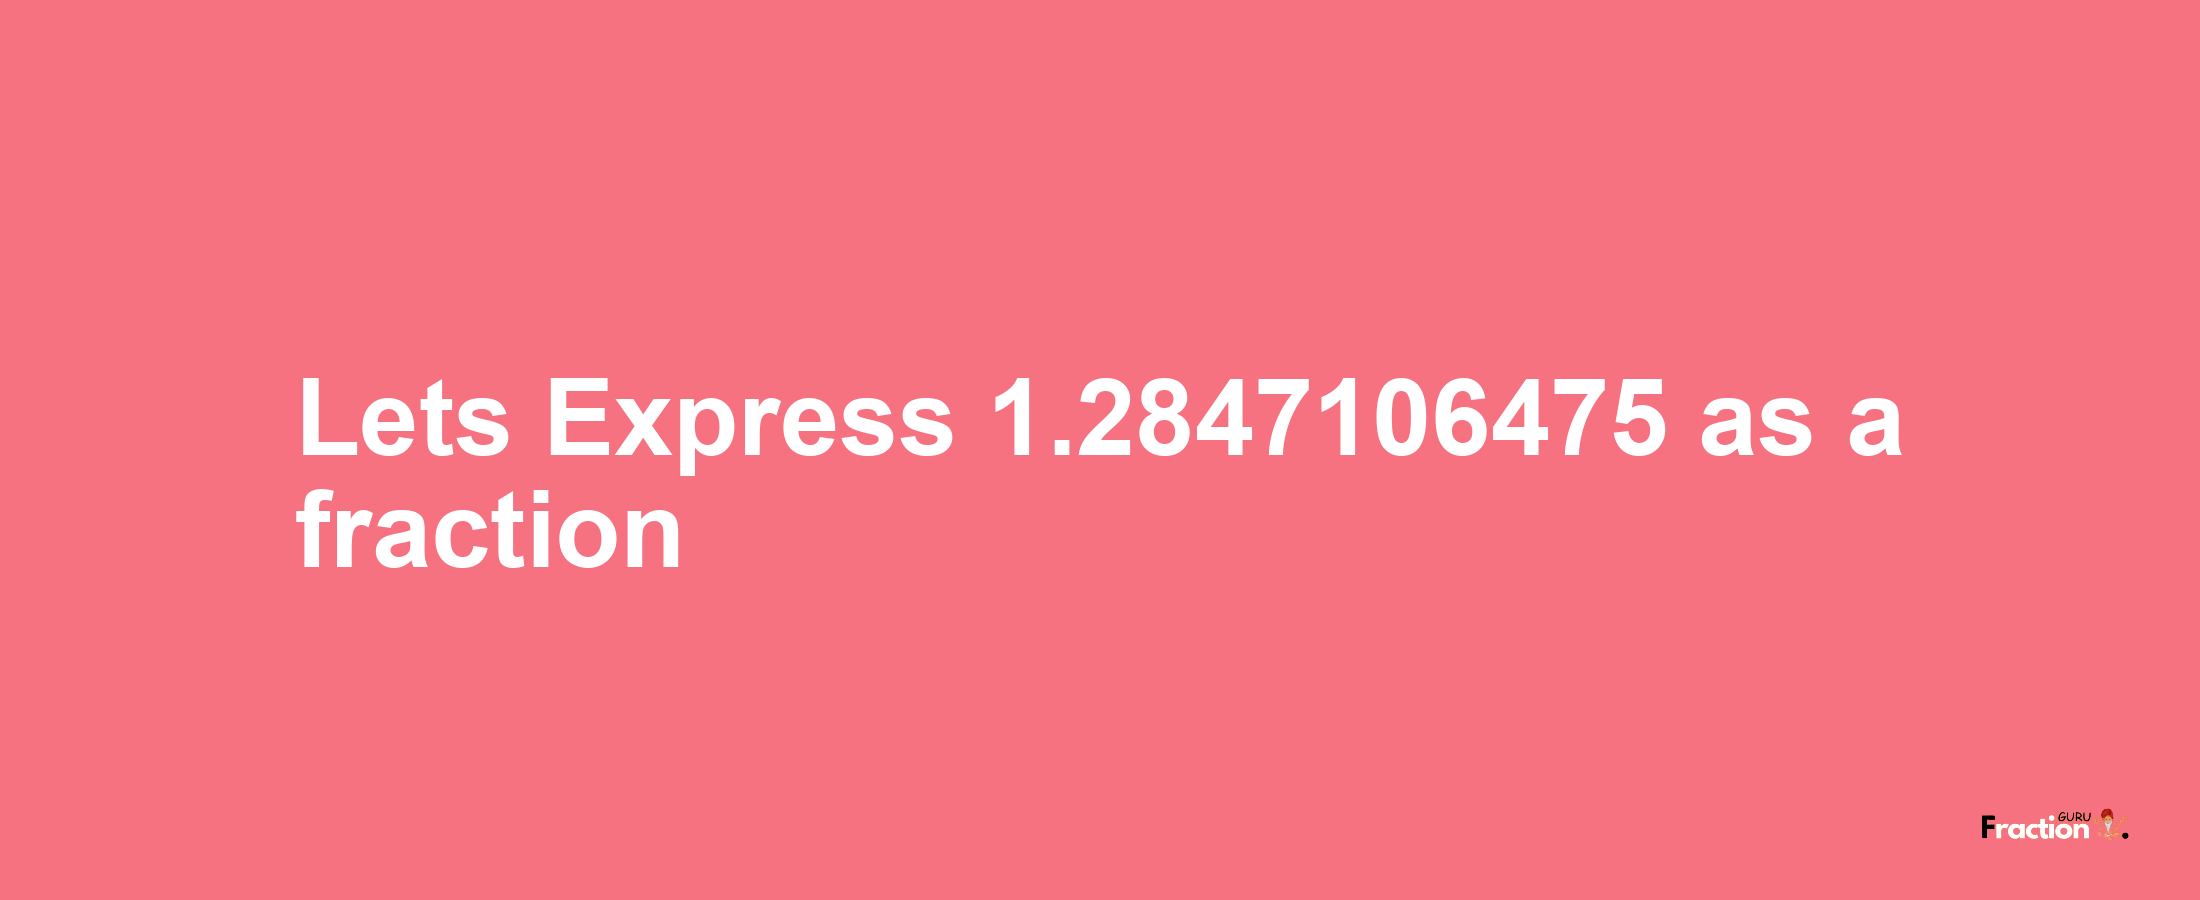 Lets Express 1.2847106475 as afraction